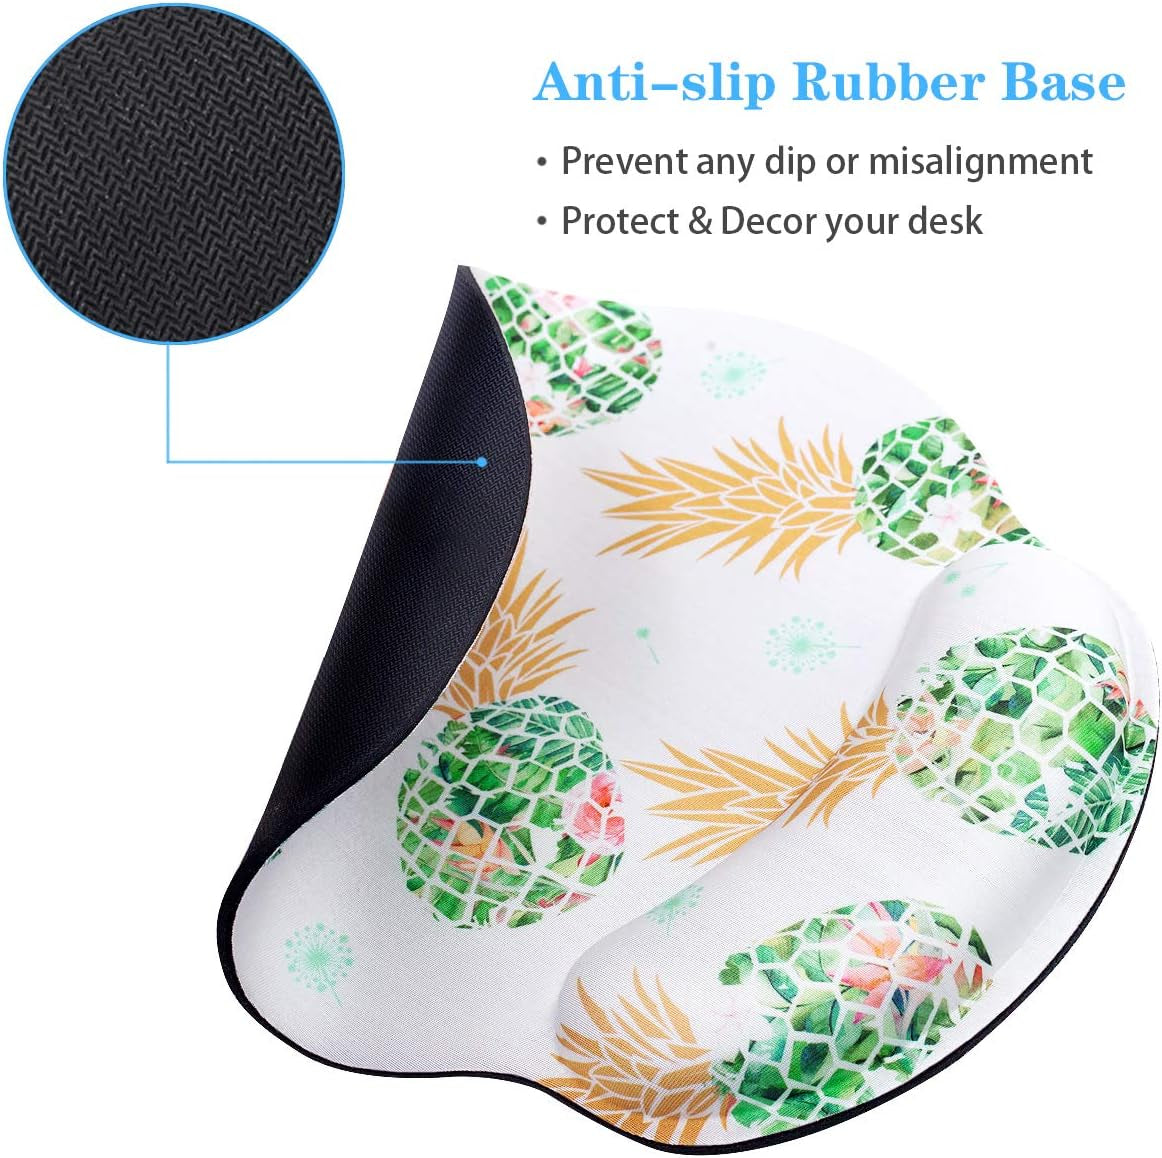 Pineapple Mouse Pad with Wrist Support, Cute Designed Mouse Mat with Wrist Rest for Women Girls, Comfortable Non-Slip Rubber Base Mousepad for Laptop, Computer, 9'' X 10'', Green Pineapple